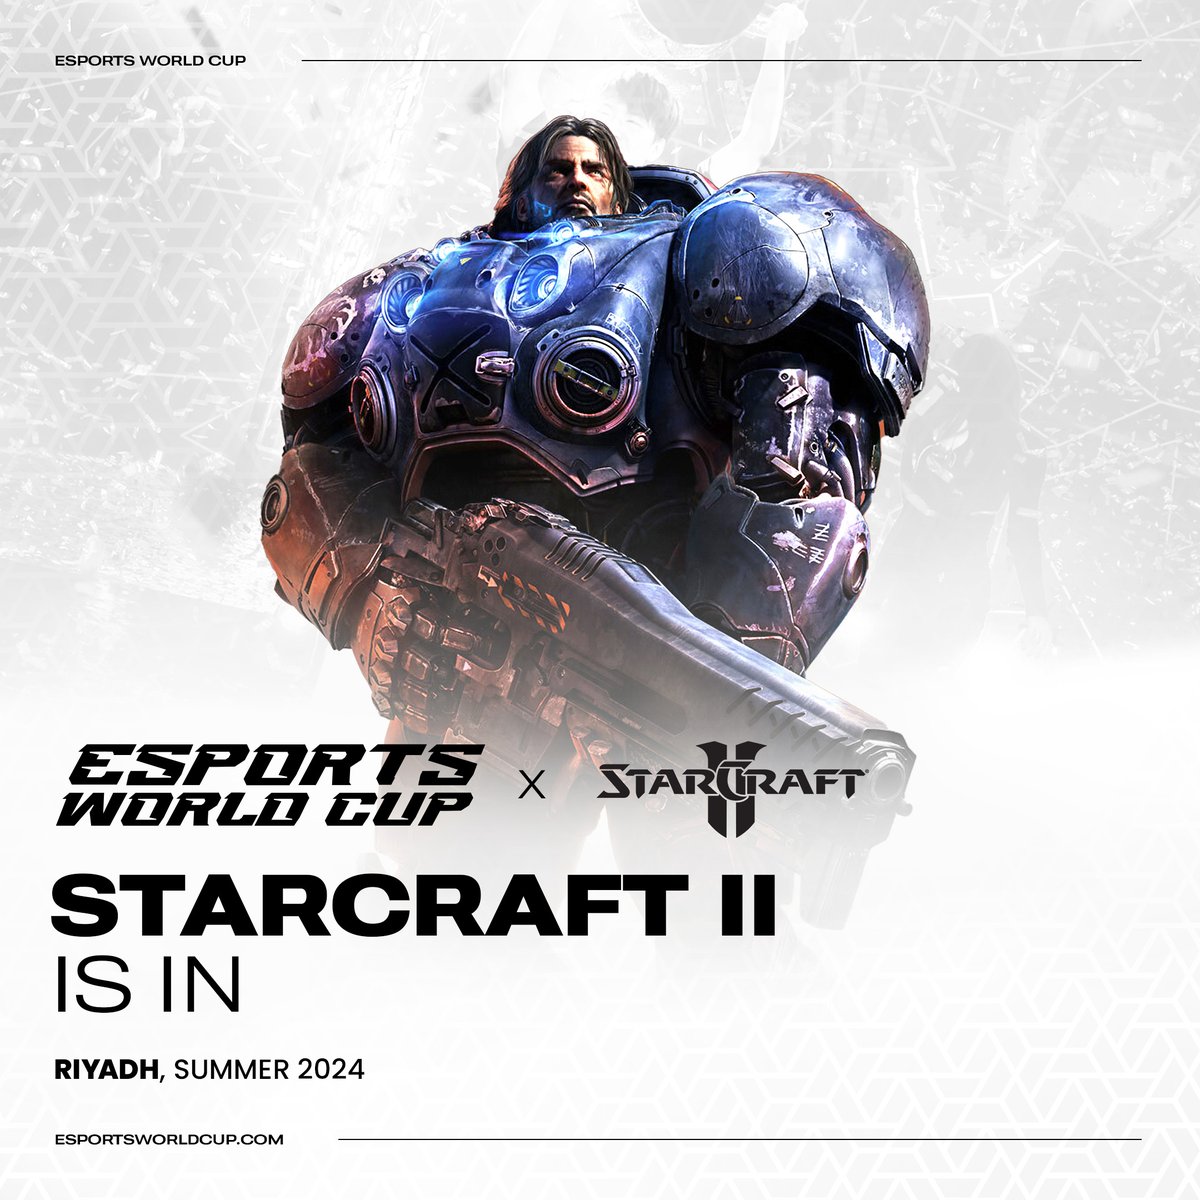 The world's most storied esport is joining the official #EsportsWorldCup lineup!

StarCraft II will be featured at #EWC as the World Championship event for #ESLProTour, crowning the best #SC2 player on the planet!

Who are you rooting for? Tell us in the comments below! 👇👇